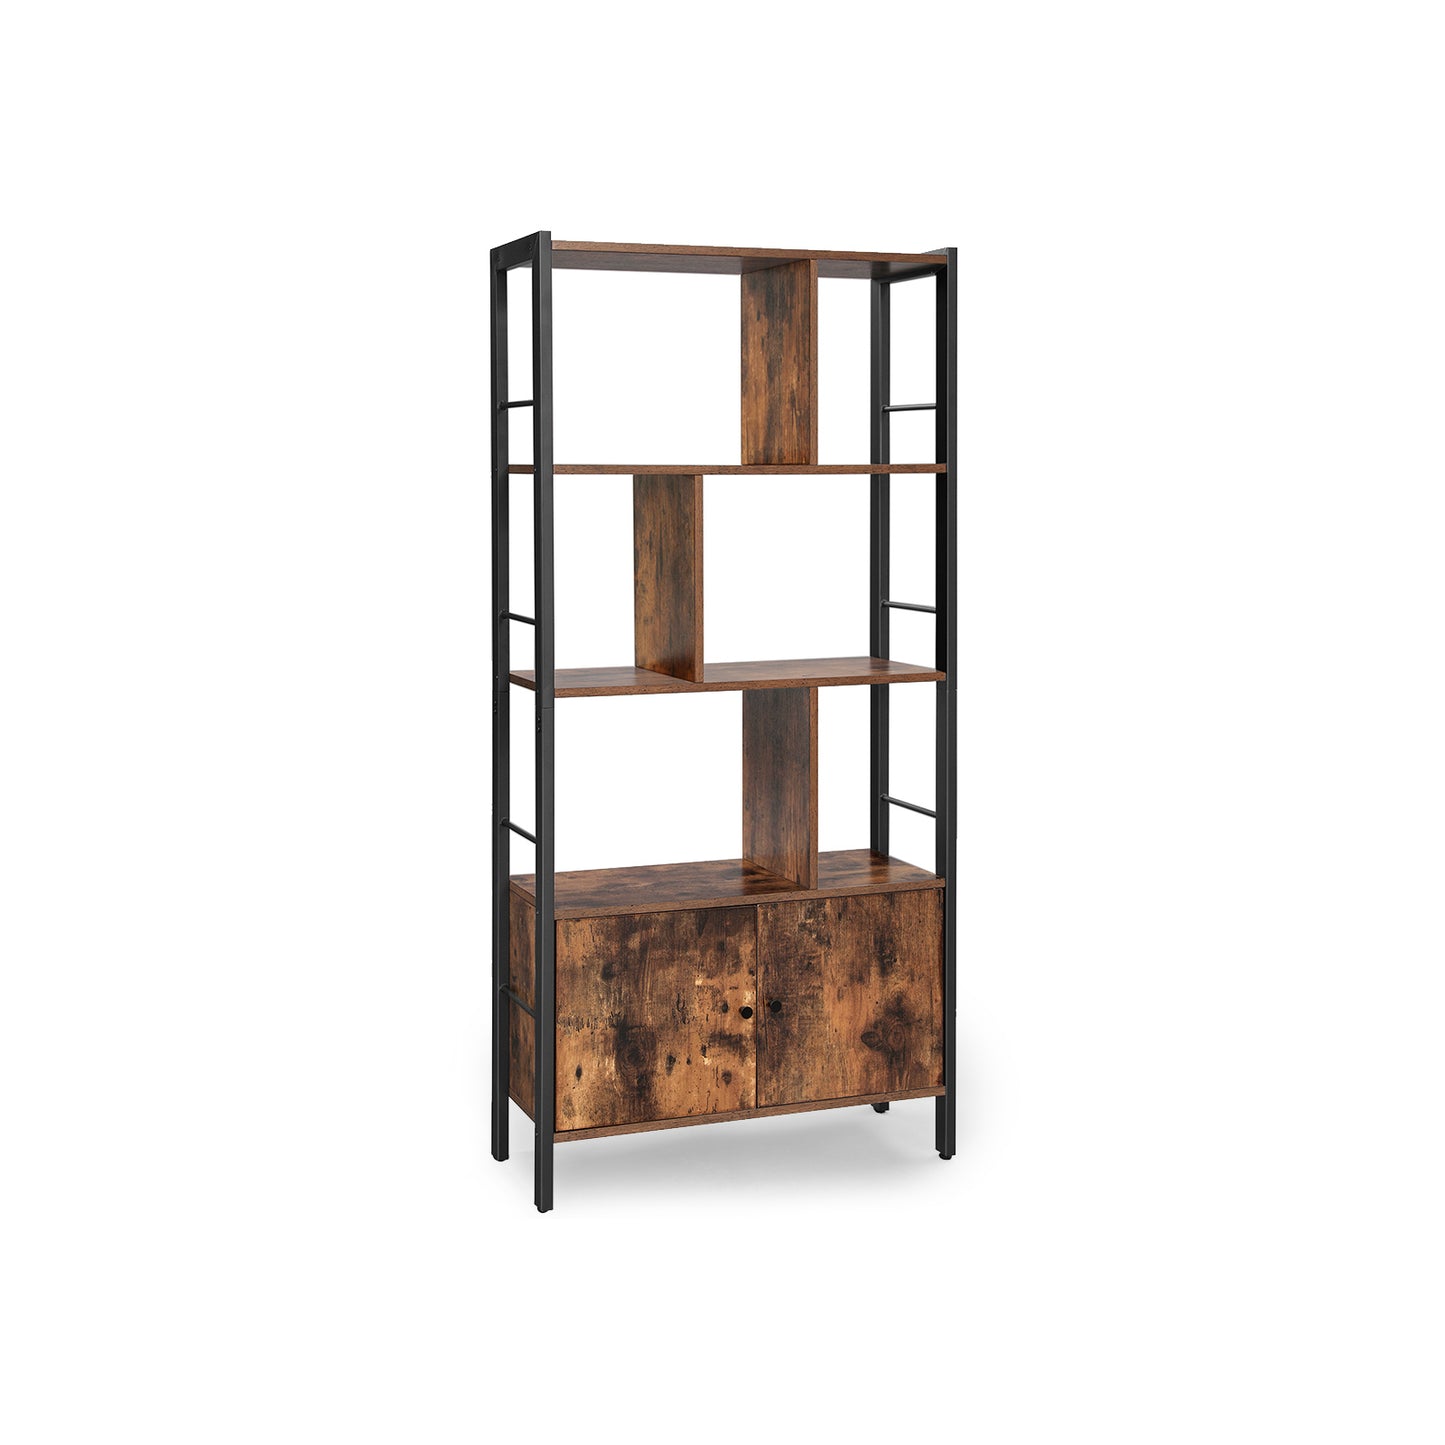 Bookcase with 4 shelves